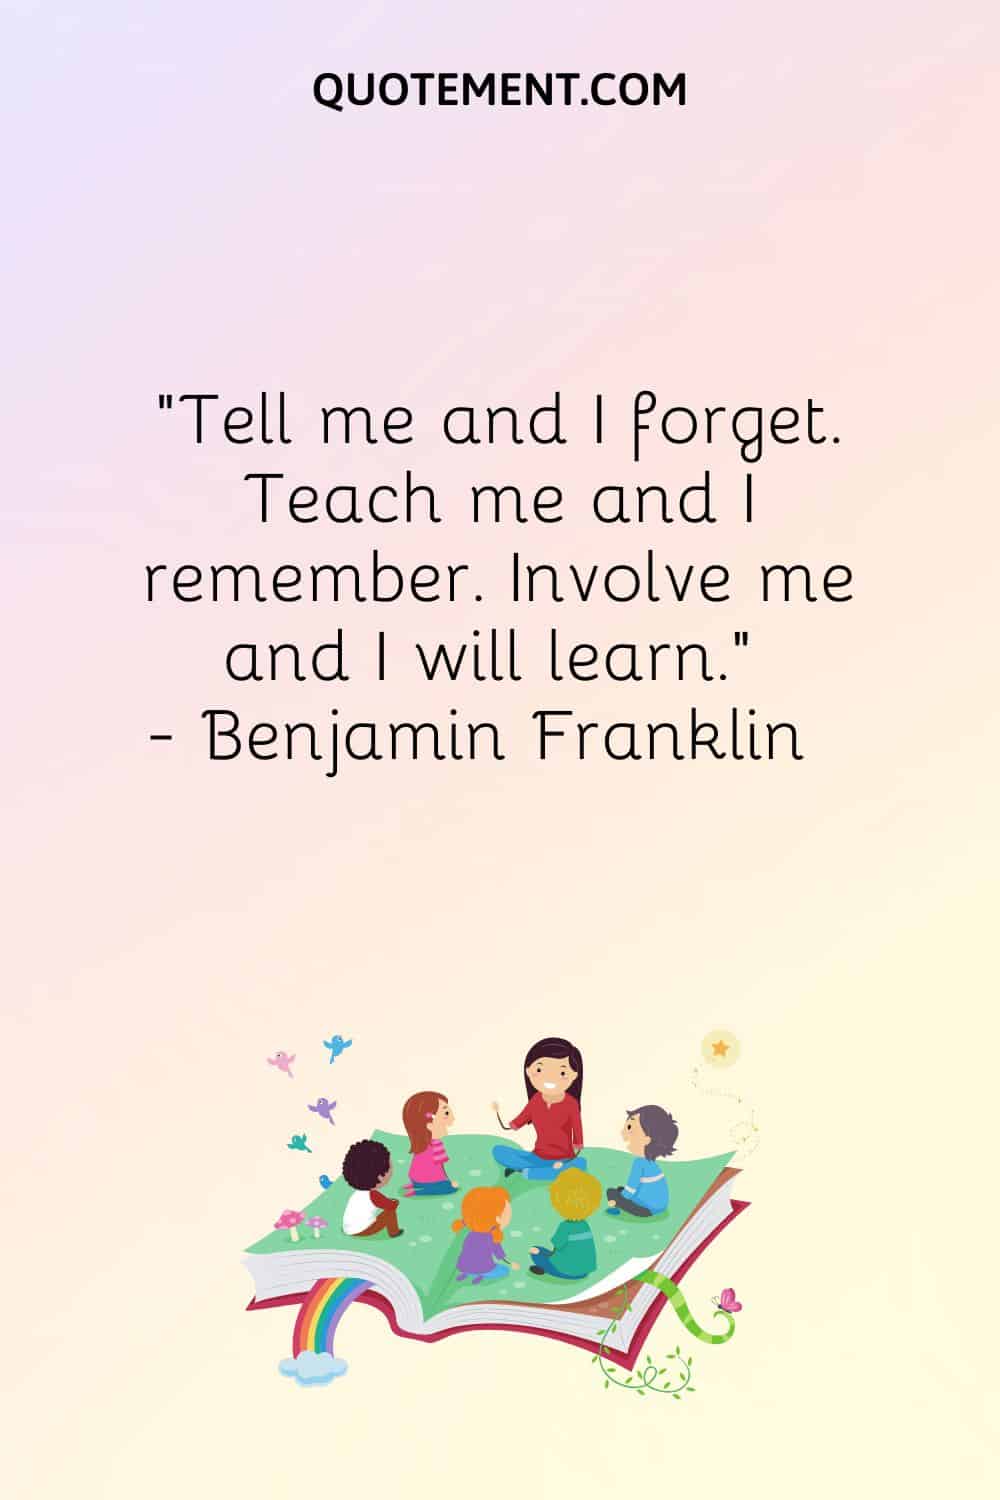 Tell me and I forget. Teach me and I remember. Involve me and I will learn